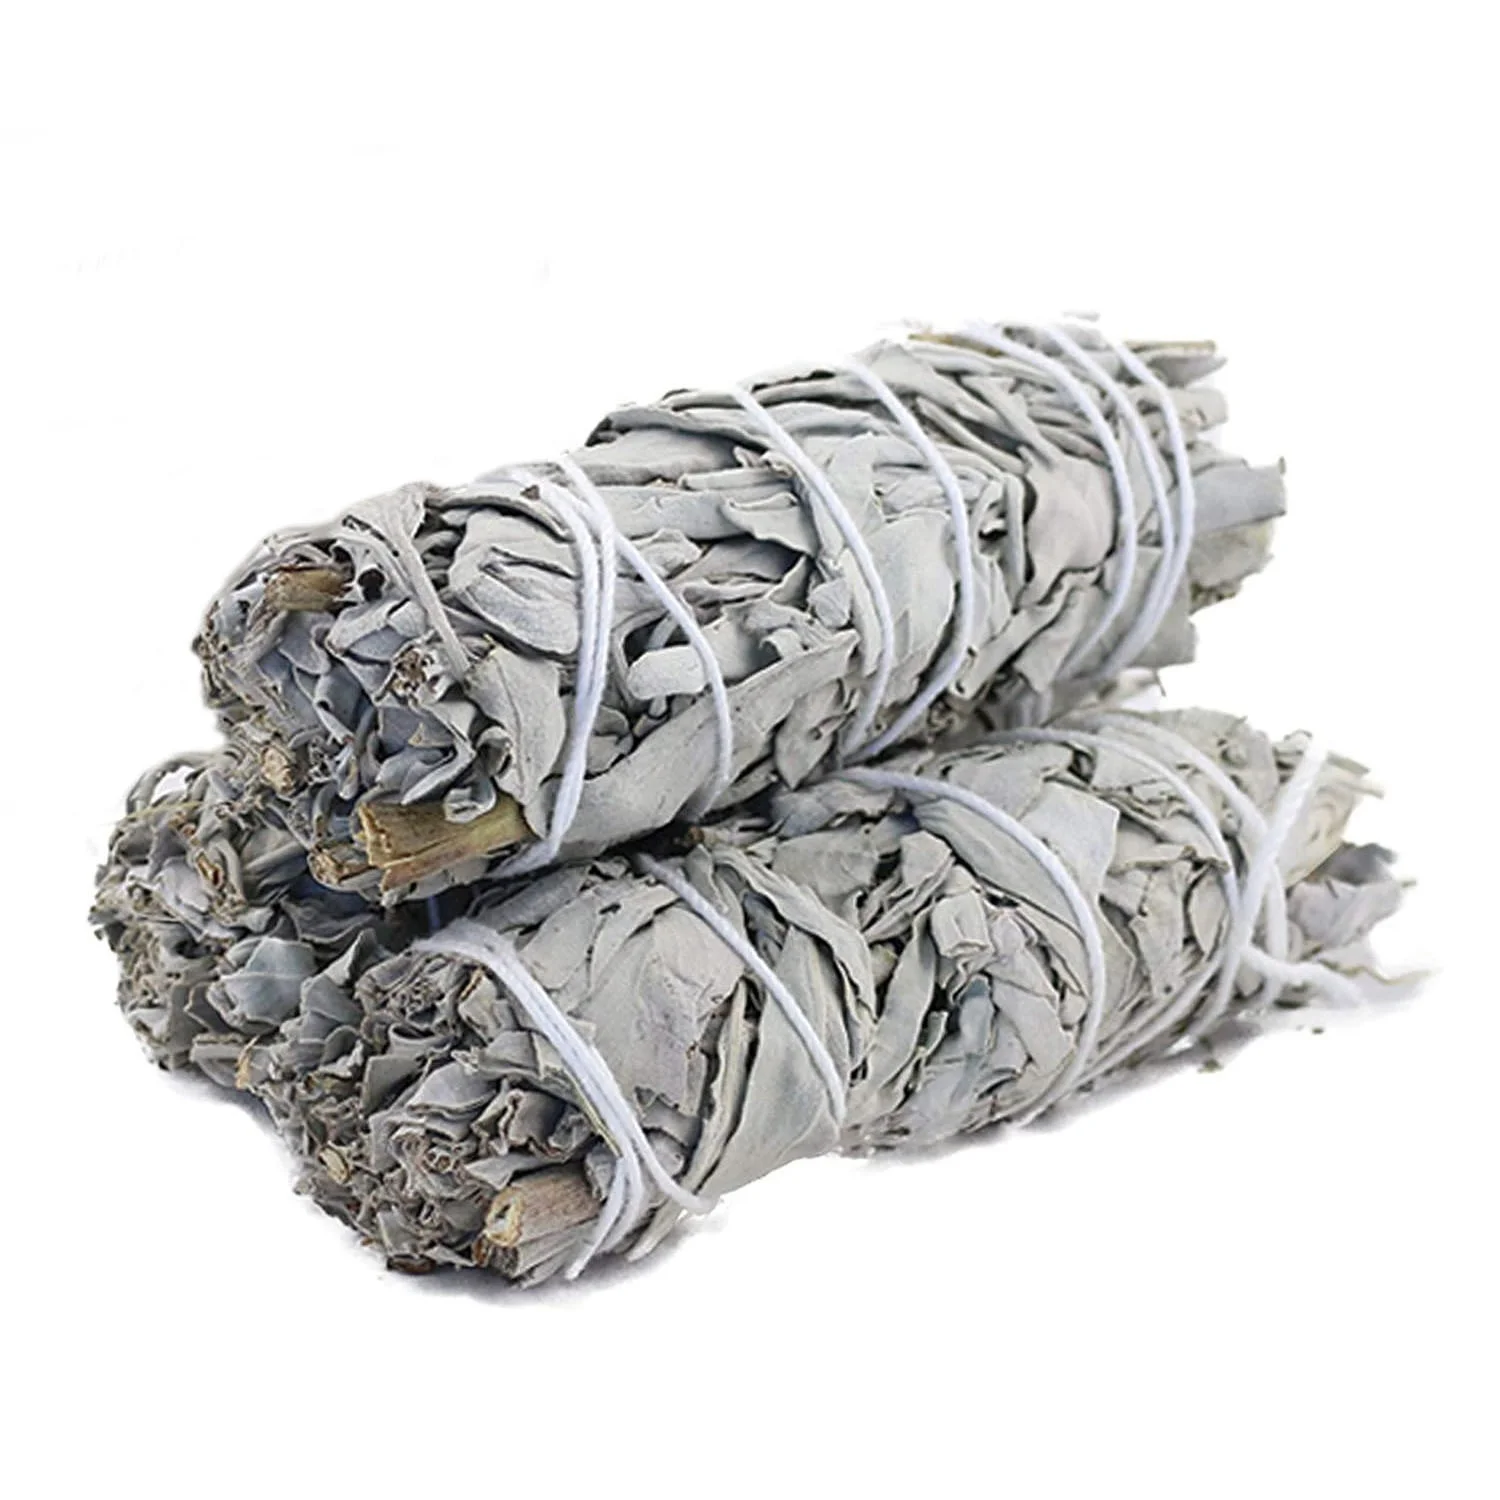 

California White Sage Smudge Sticks Use for Home Cleansing, Meditation, and Smudging Rituals